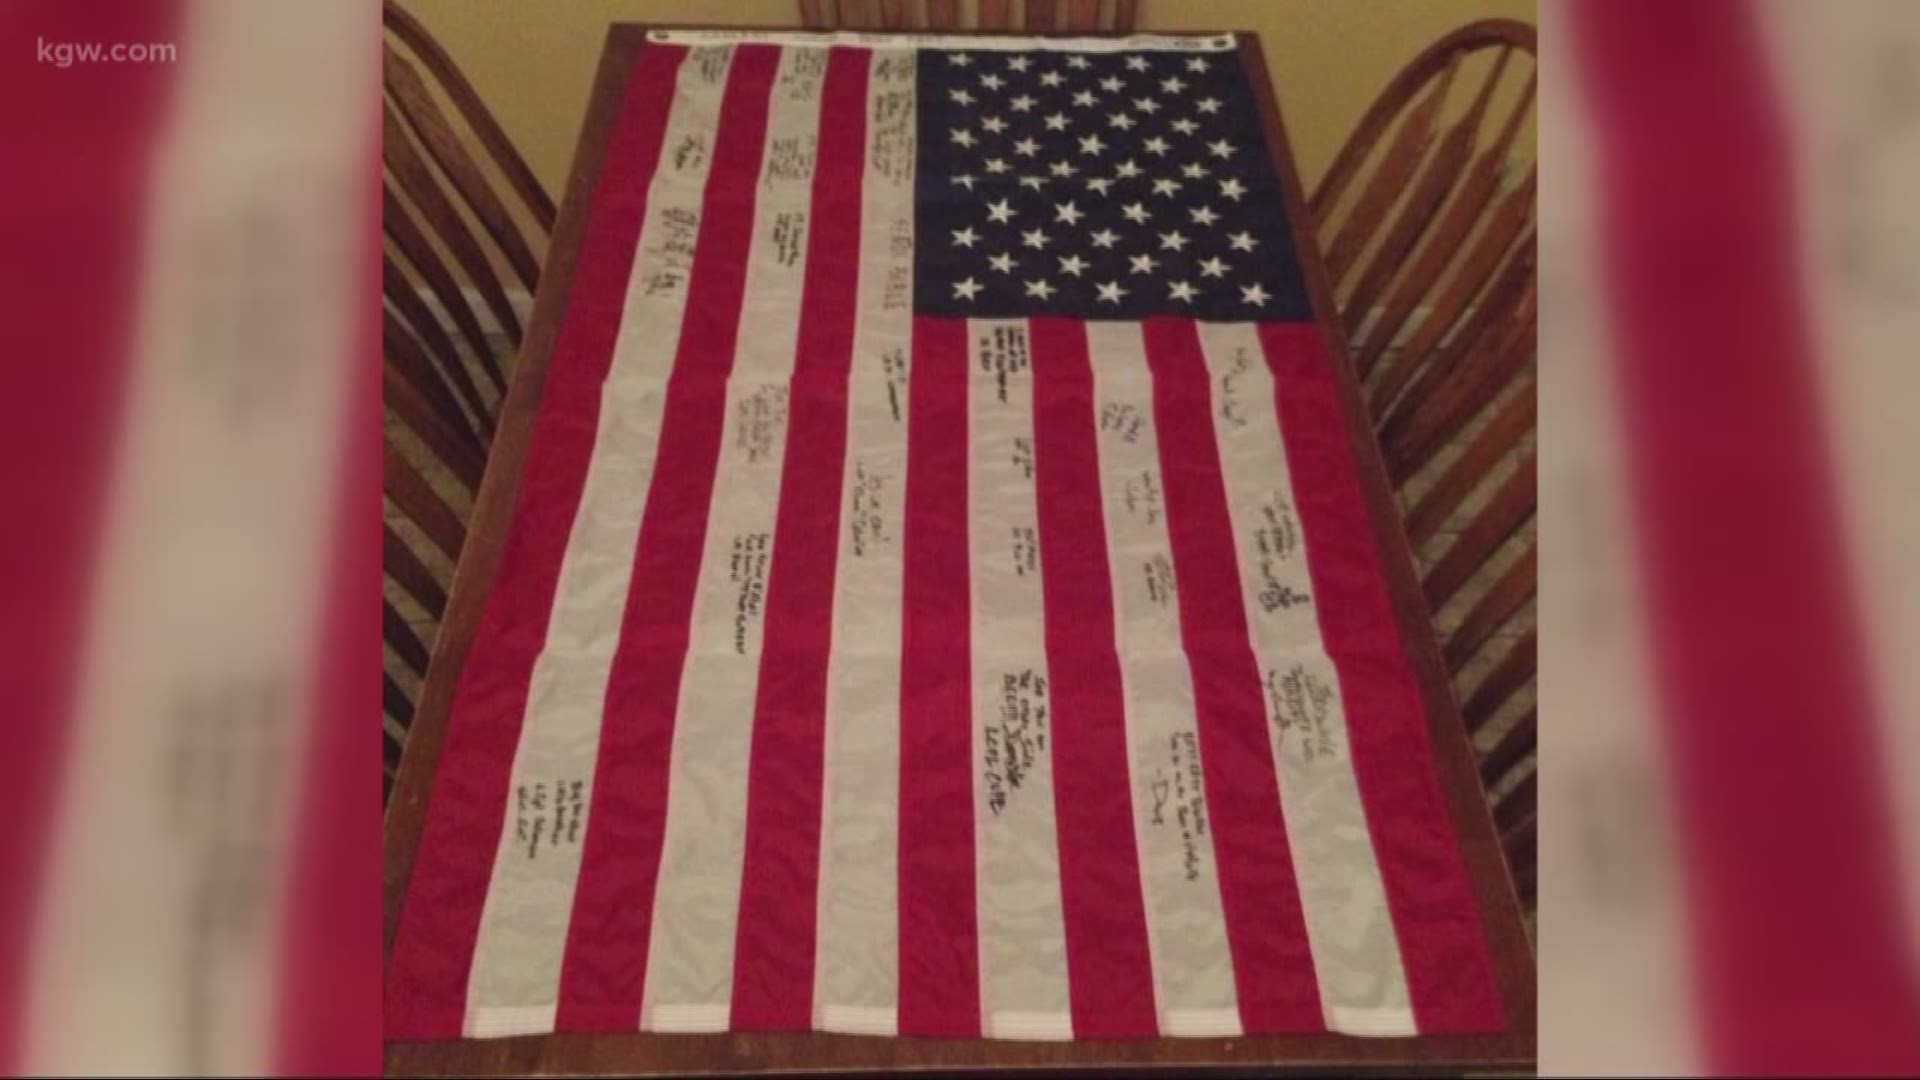 A Central Washington man's Facebook post asking for help to find an American flag signed by his fallen son and comrades has gone viral.